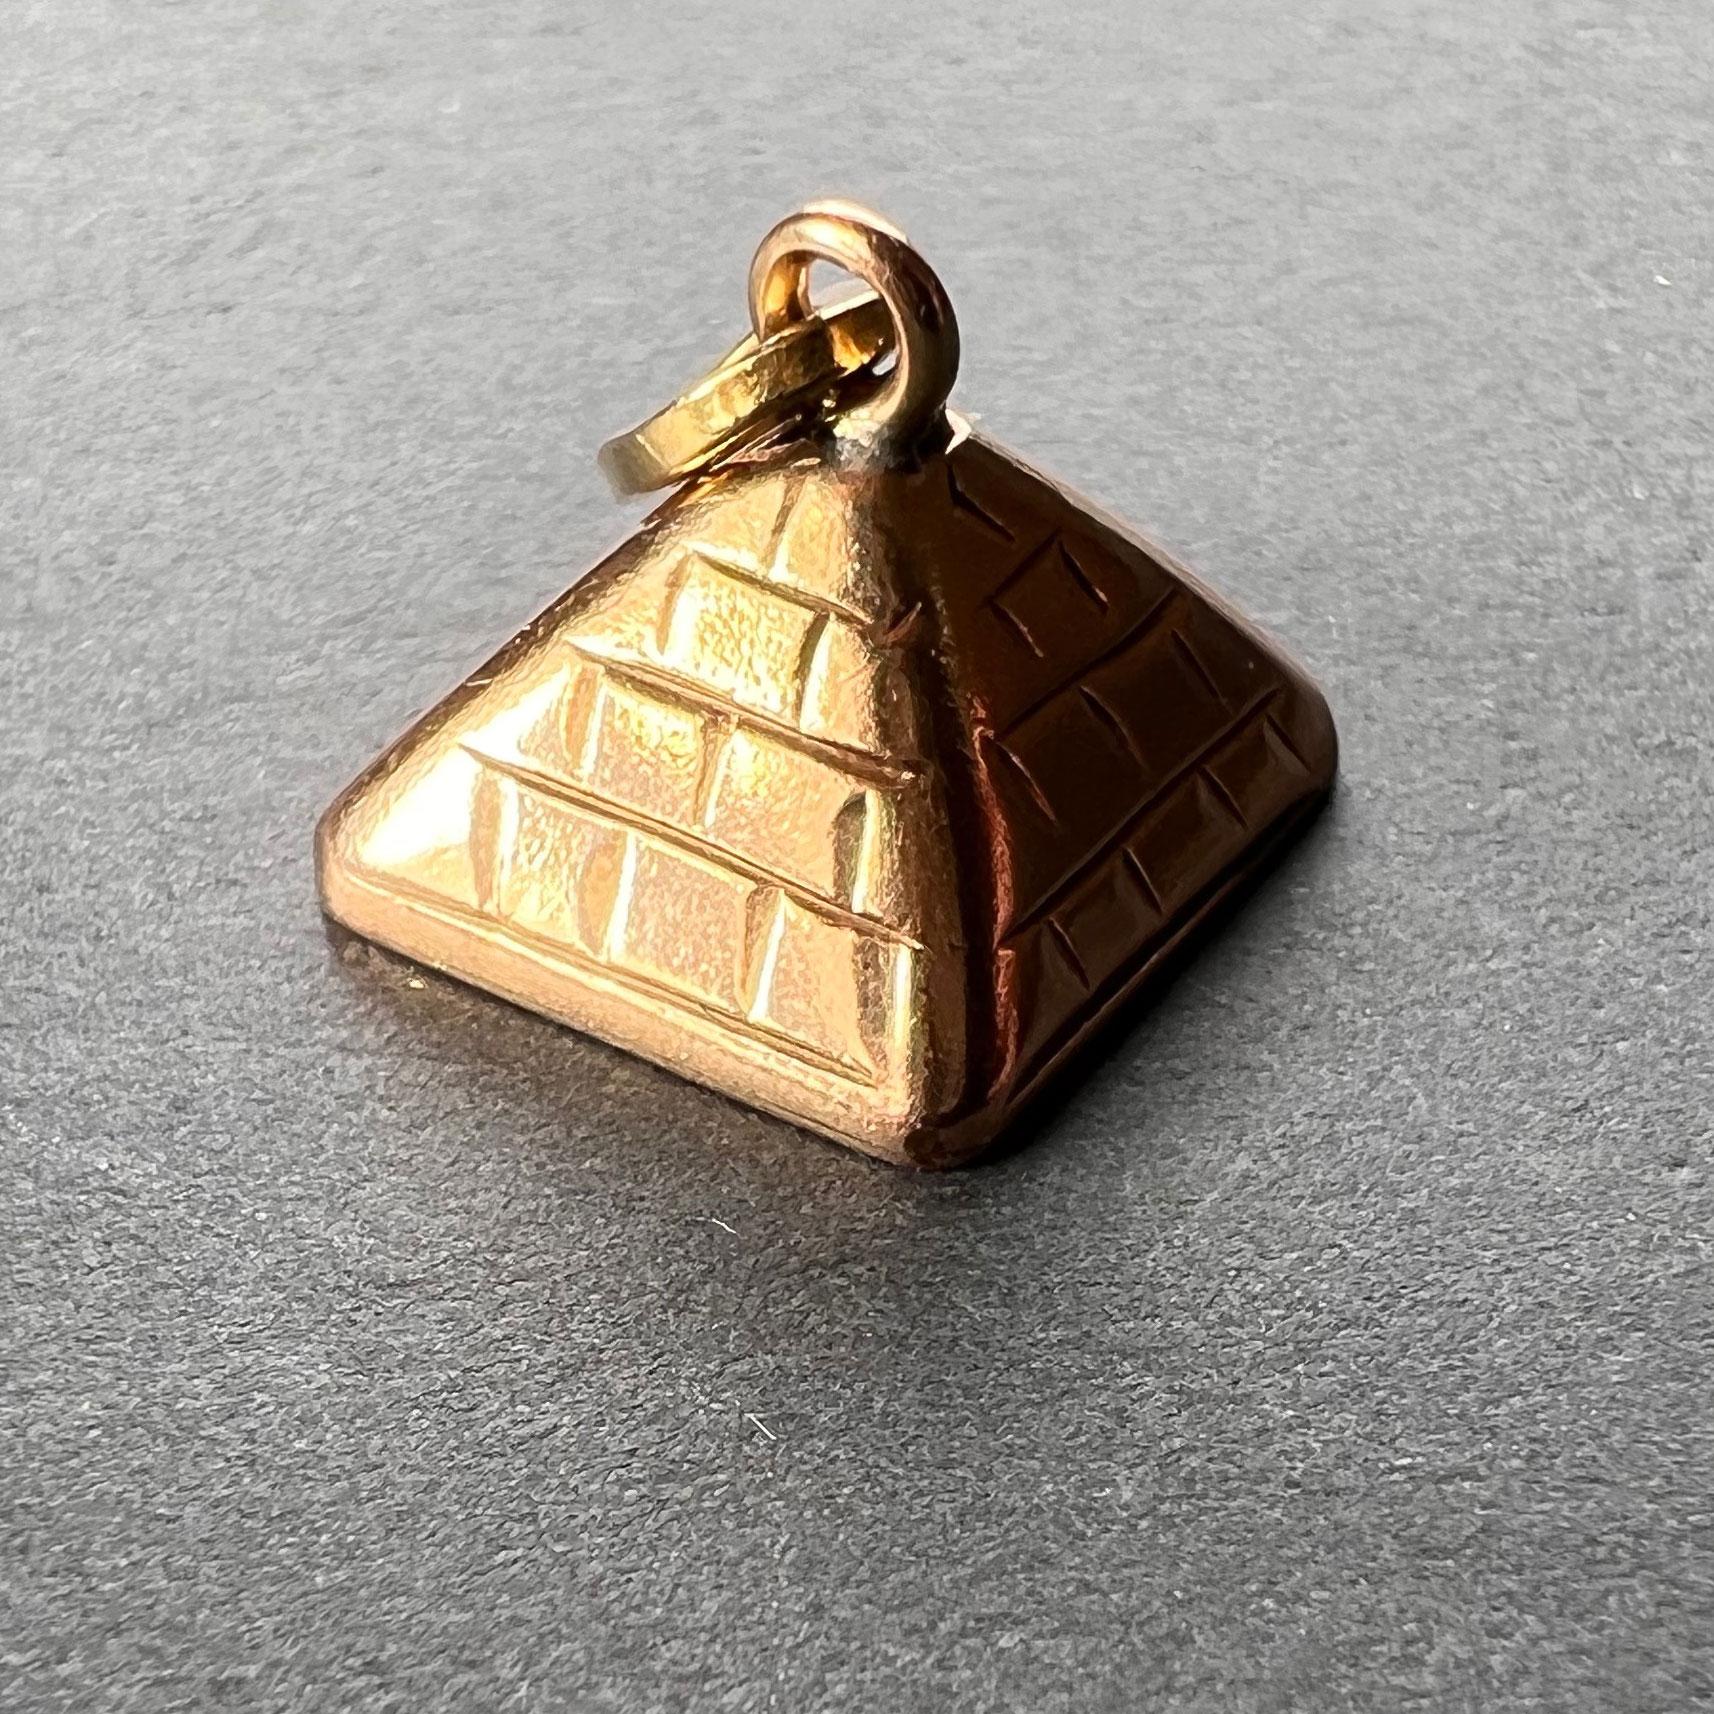 A 14 karat (14K) rose gold charm pendant designed as an Egyptian pyramid. Unmarked but tested for 14 karat gold.
 
Dimensions: 0.95 x 1.1 x 1.1 cm (not including jump ring)
Weight: 1.48 grams 
(Chain not included)
